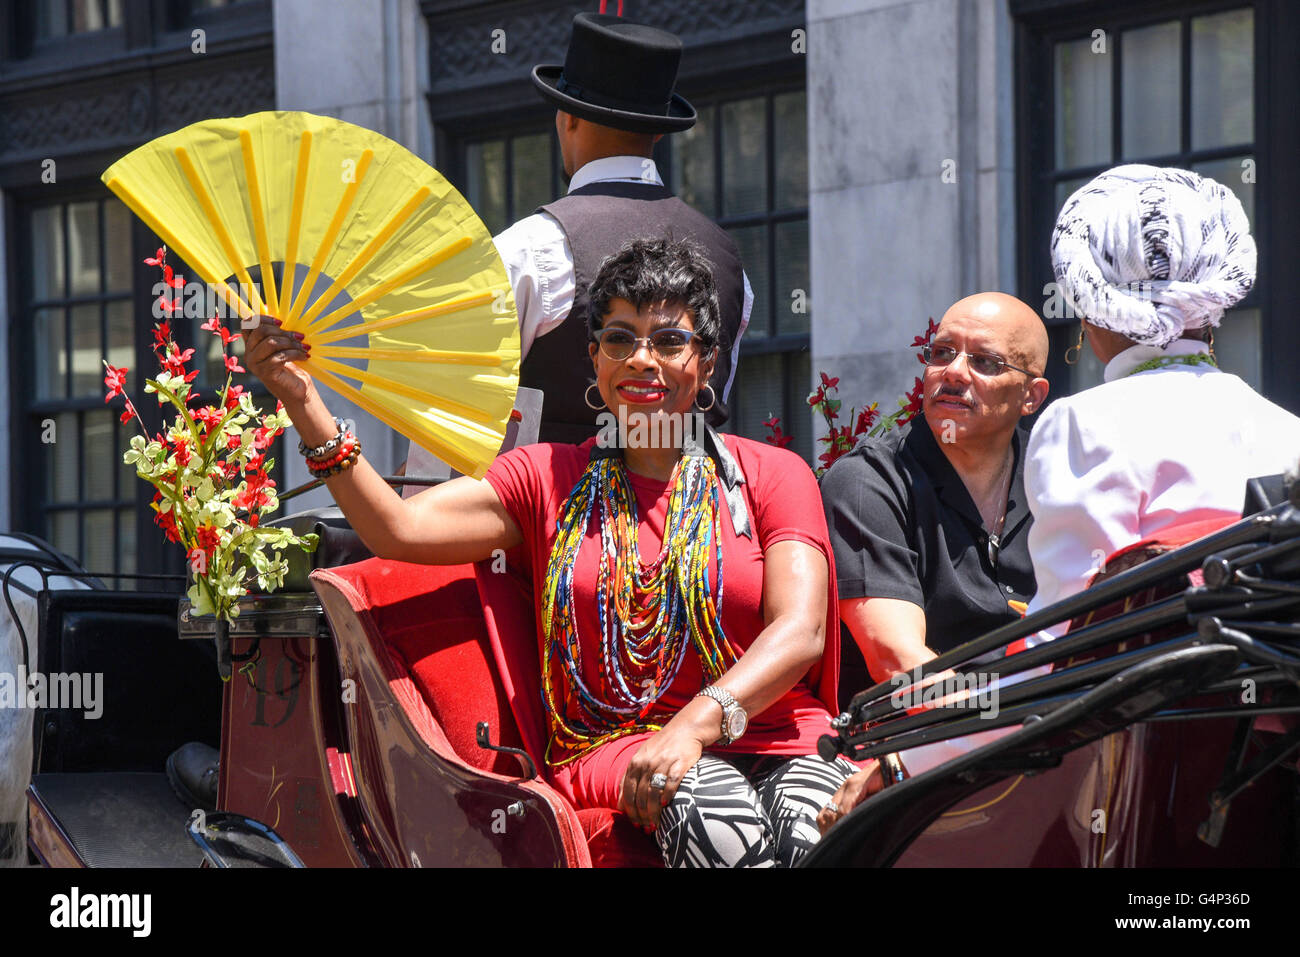 Philadelphia, Pennsylvania, USA. 18th June, 2016. Actress SHERYL LEE RALPH and her husband State Senator, VINCENT HUGHES, at the Juneteenth Celebration in Philadelphia Pa Juneteenth is the oldest known celebration commemorating the ending of slavery in the United States © Ricky Fitchett/ZUMA Wire/Alamy Live News Stock Photo